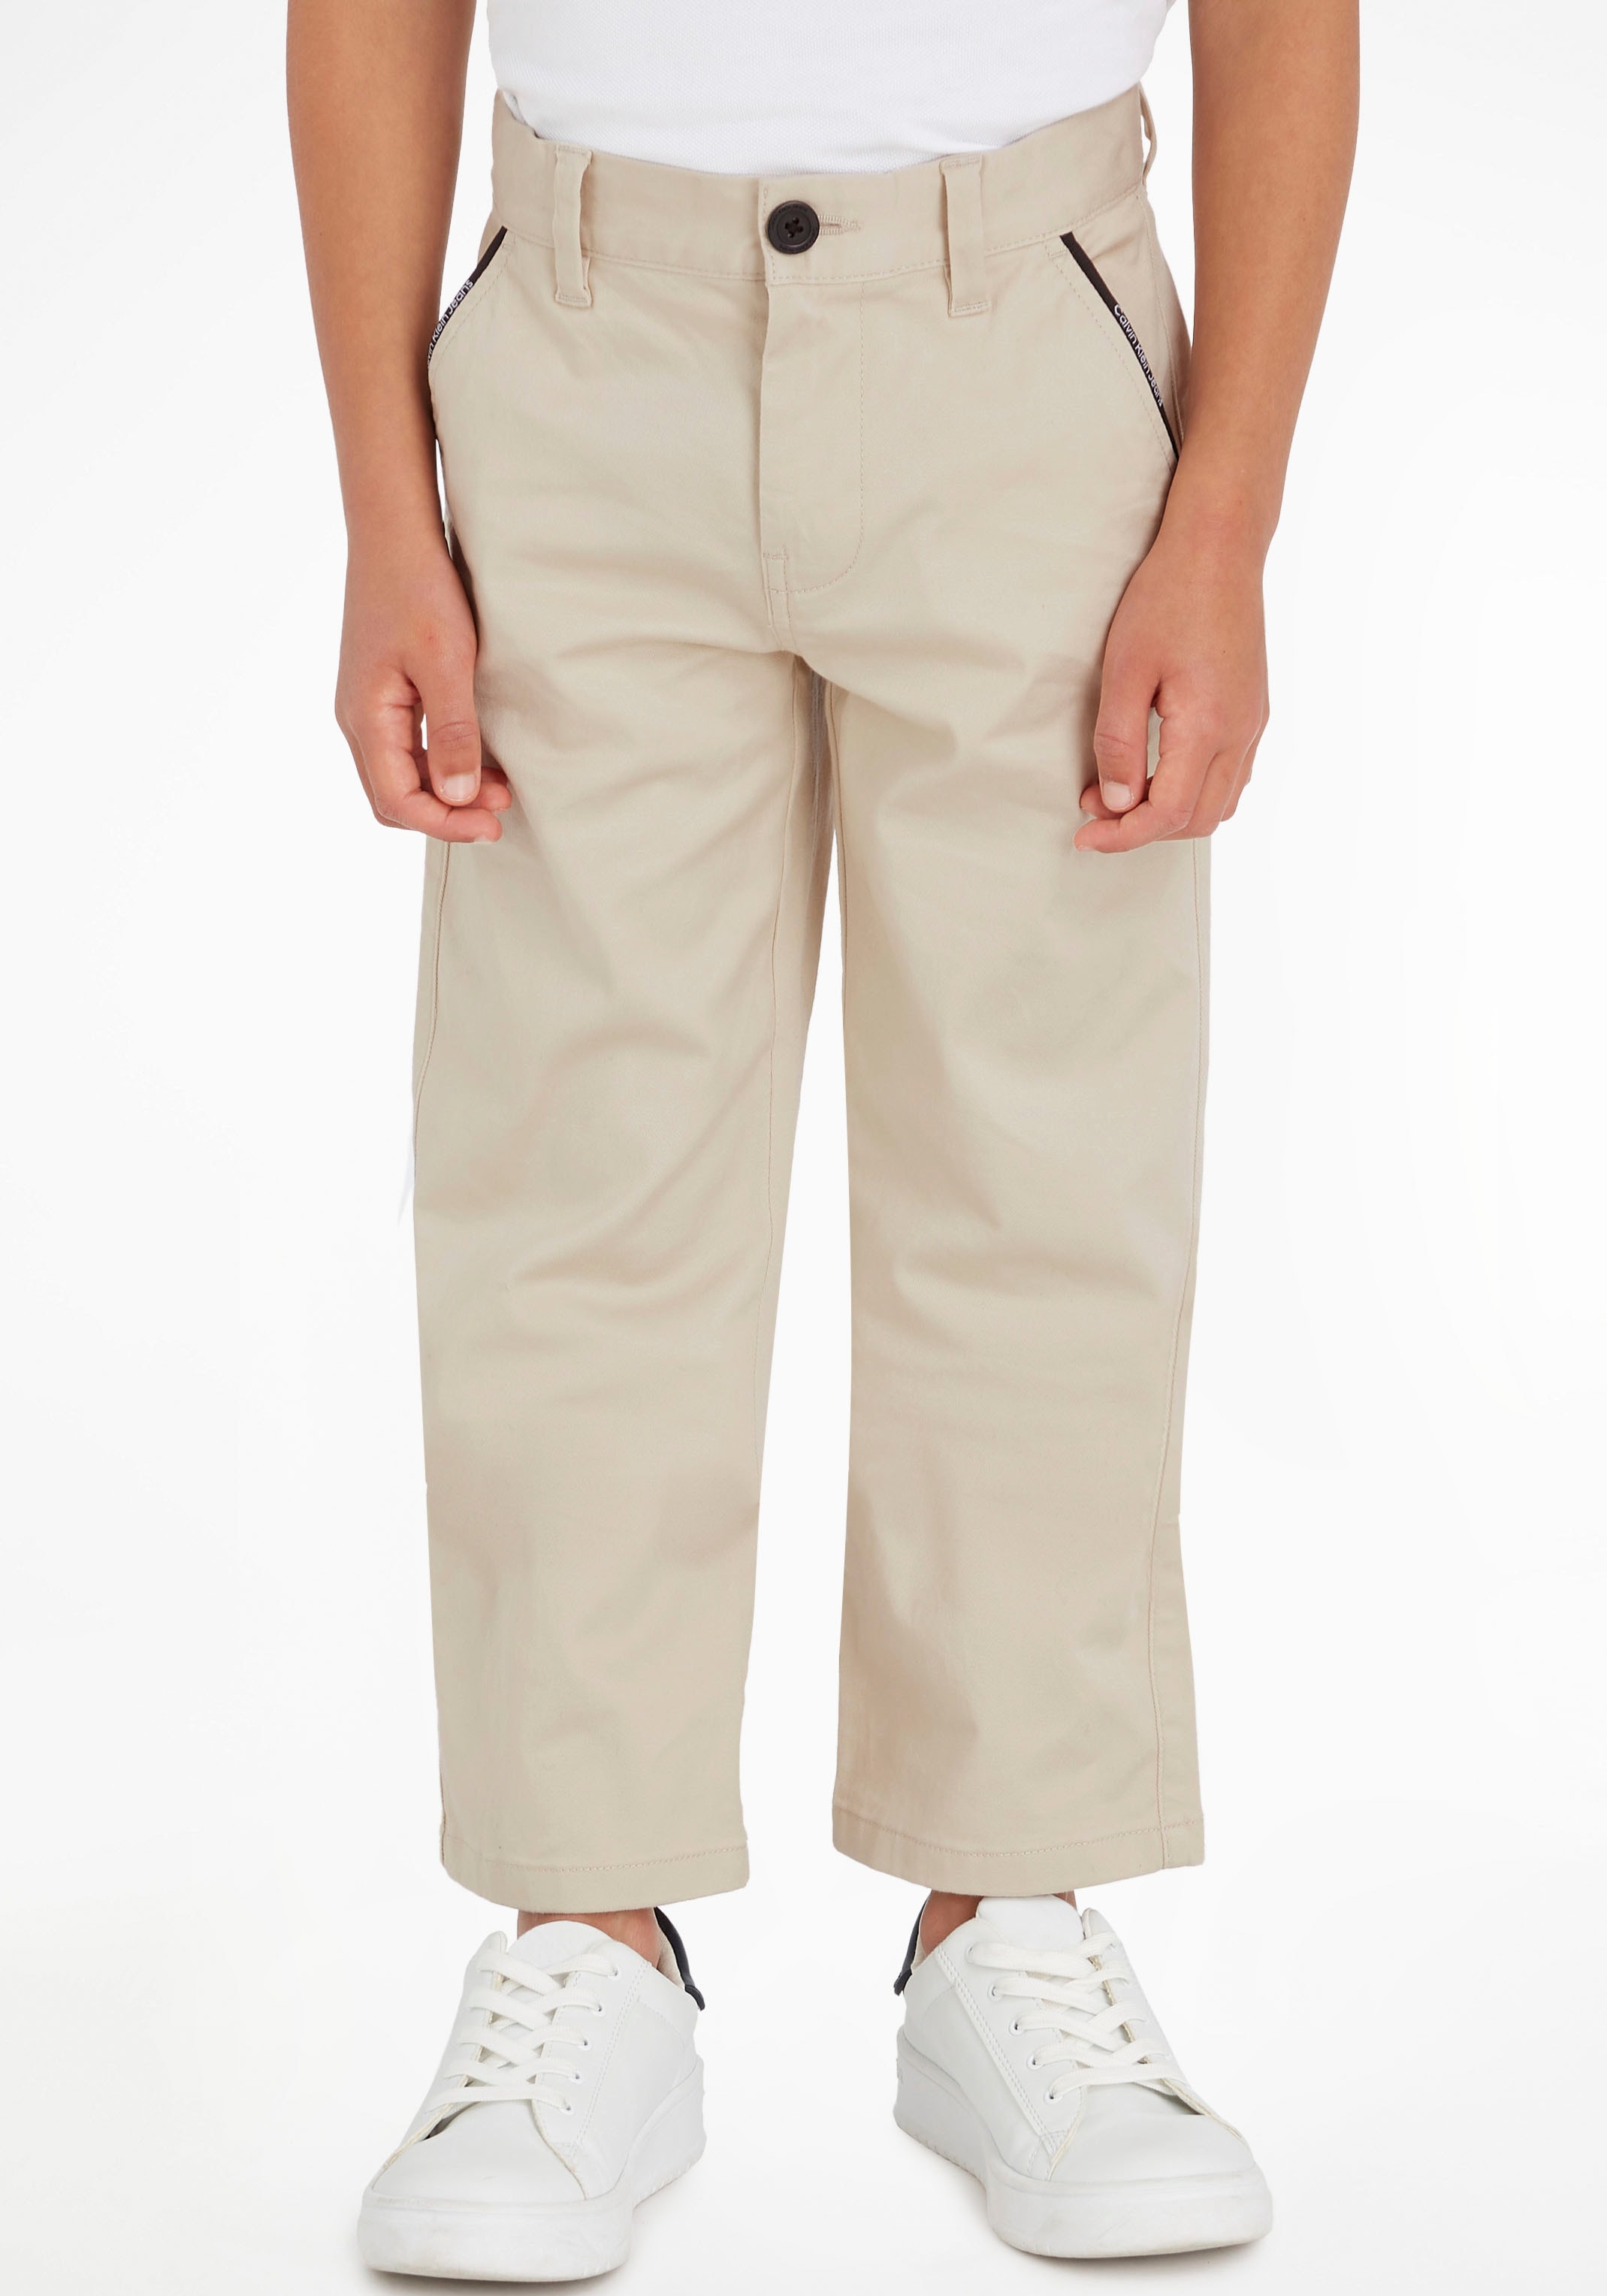 Calvin Klein Jeans Chinohose »CEREMONY TWILL CHINO PANTS«